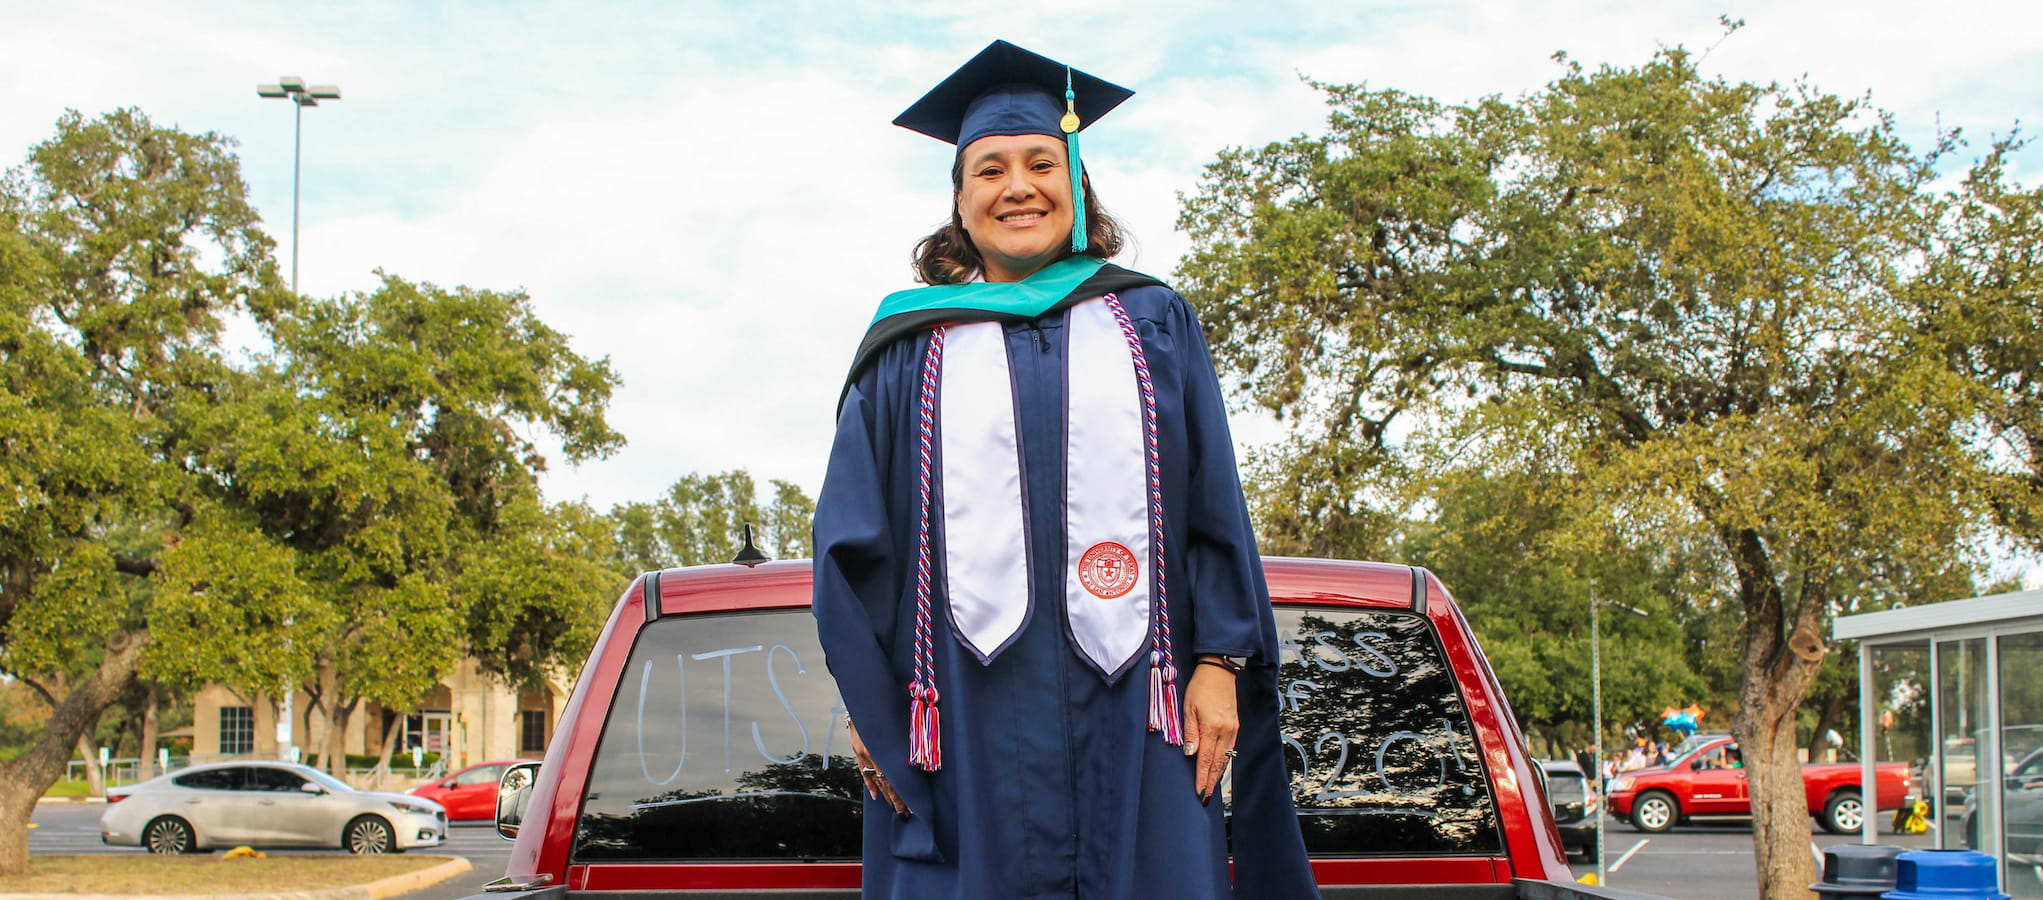 Commencement Drive student with full regalia on campus